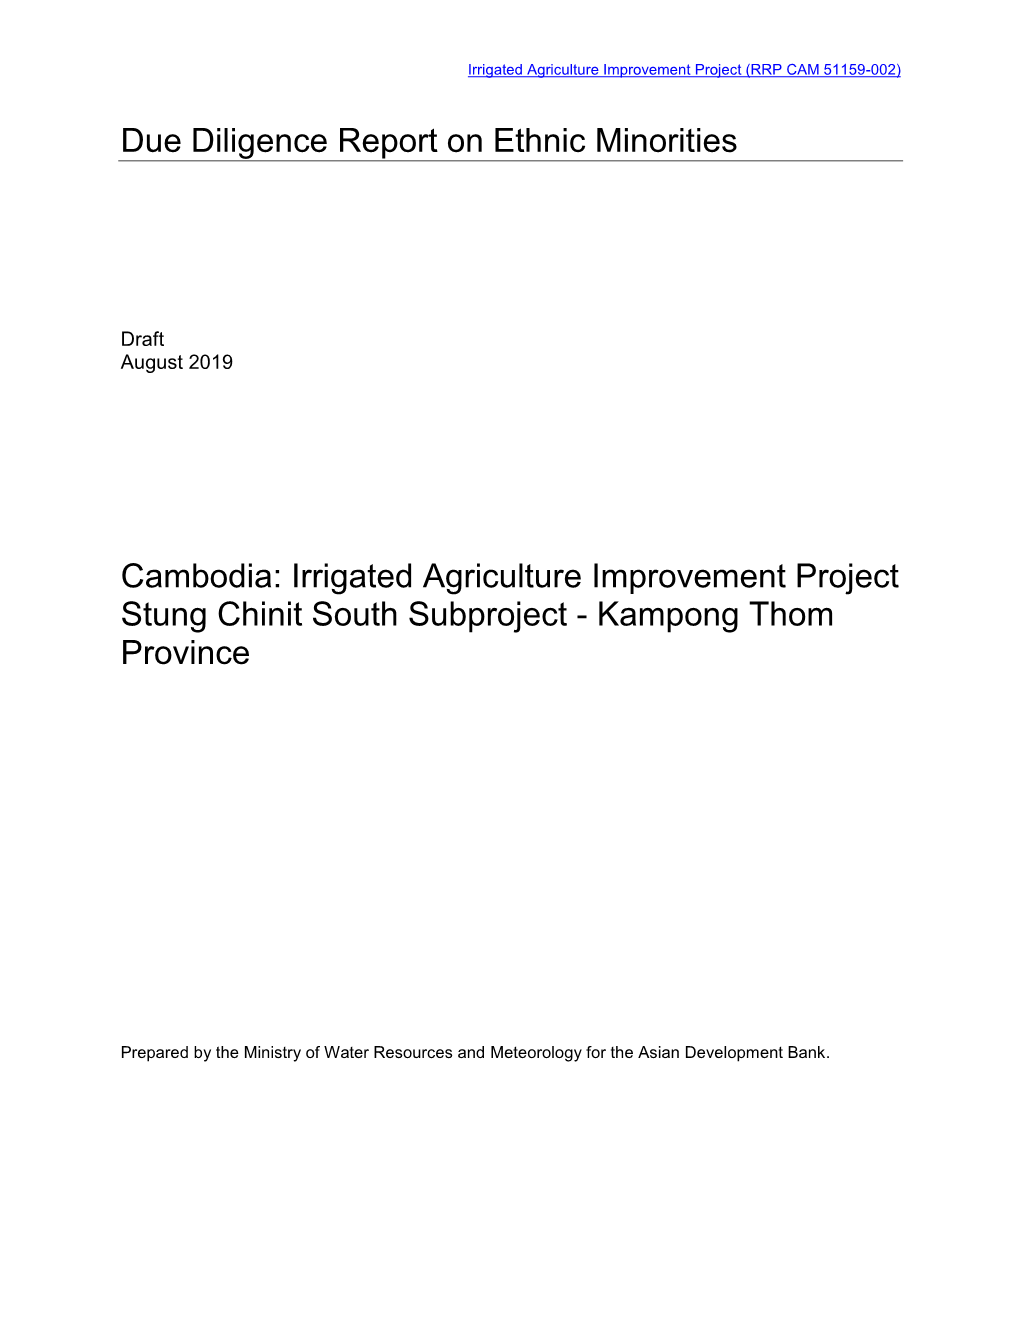 Stung Chinit South Subproject - Kampong Thom Province